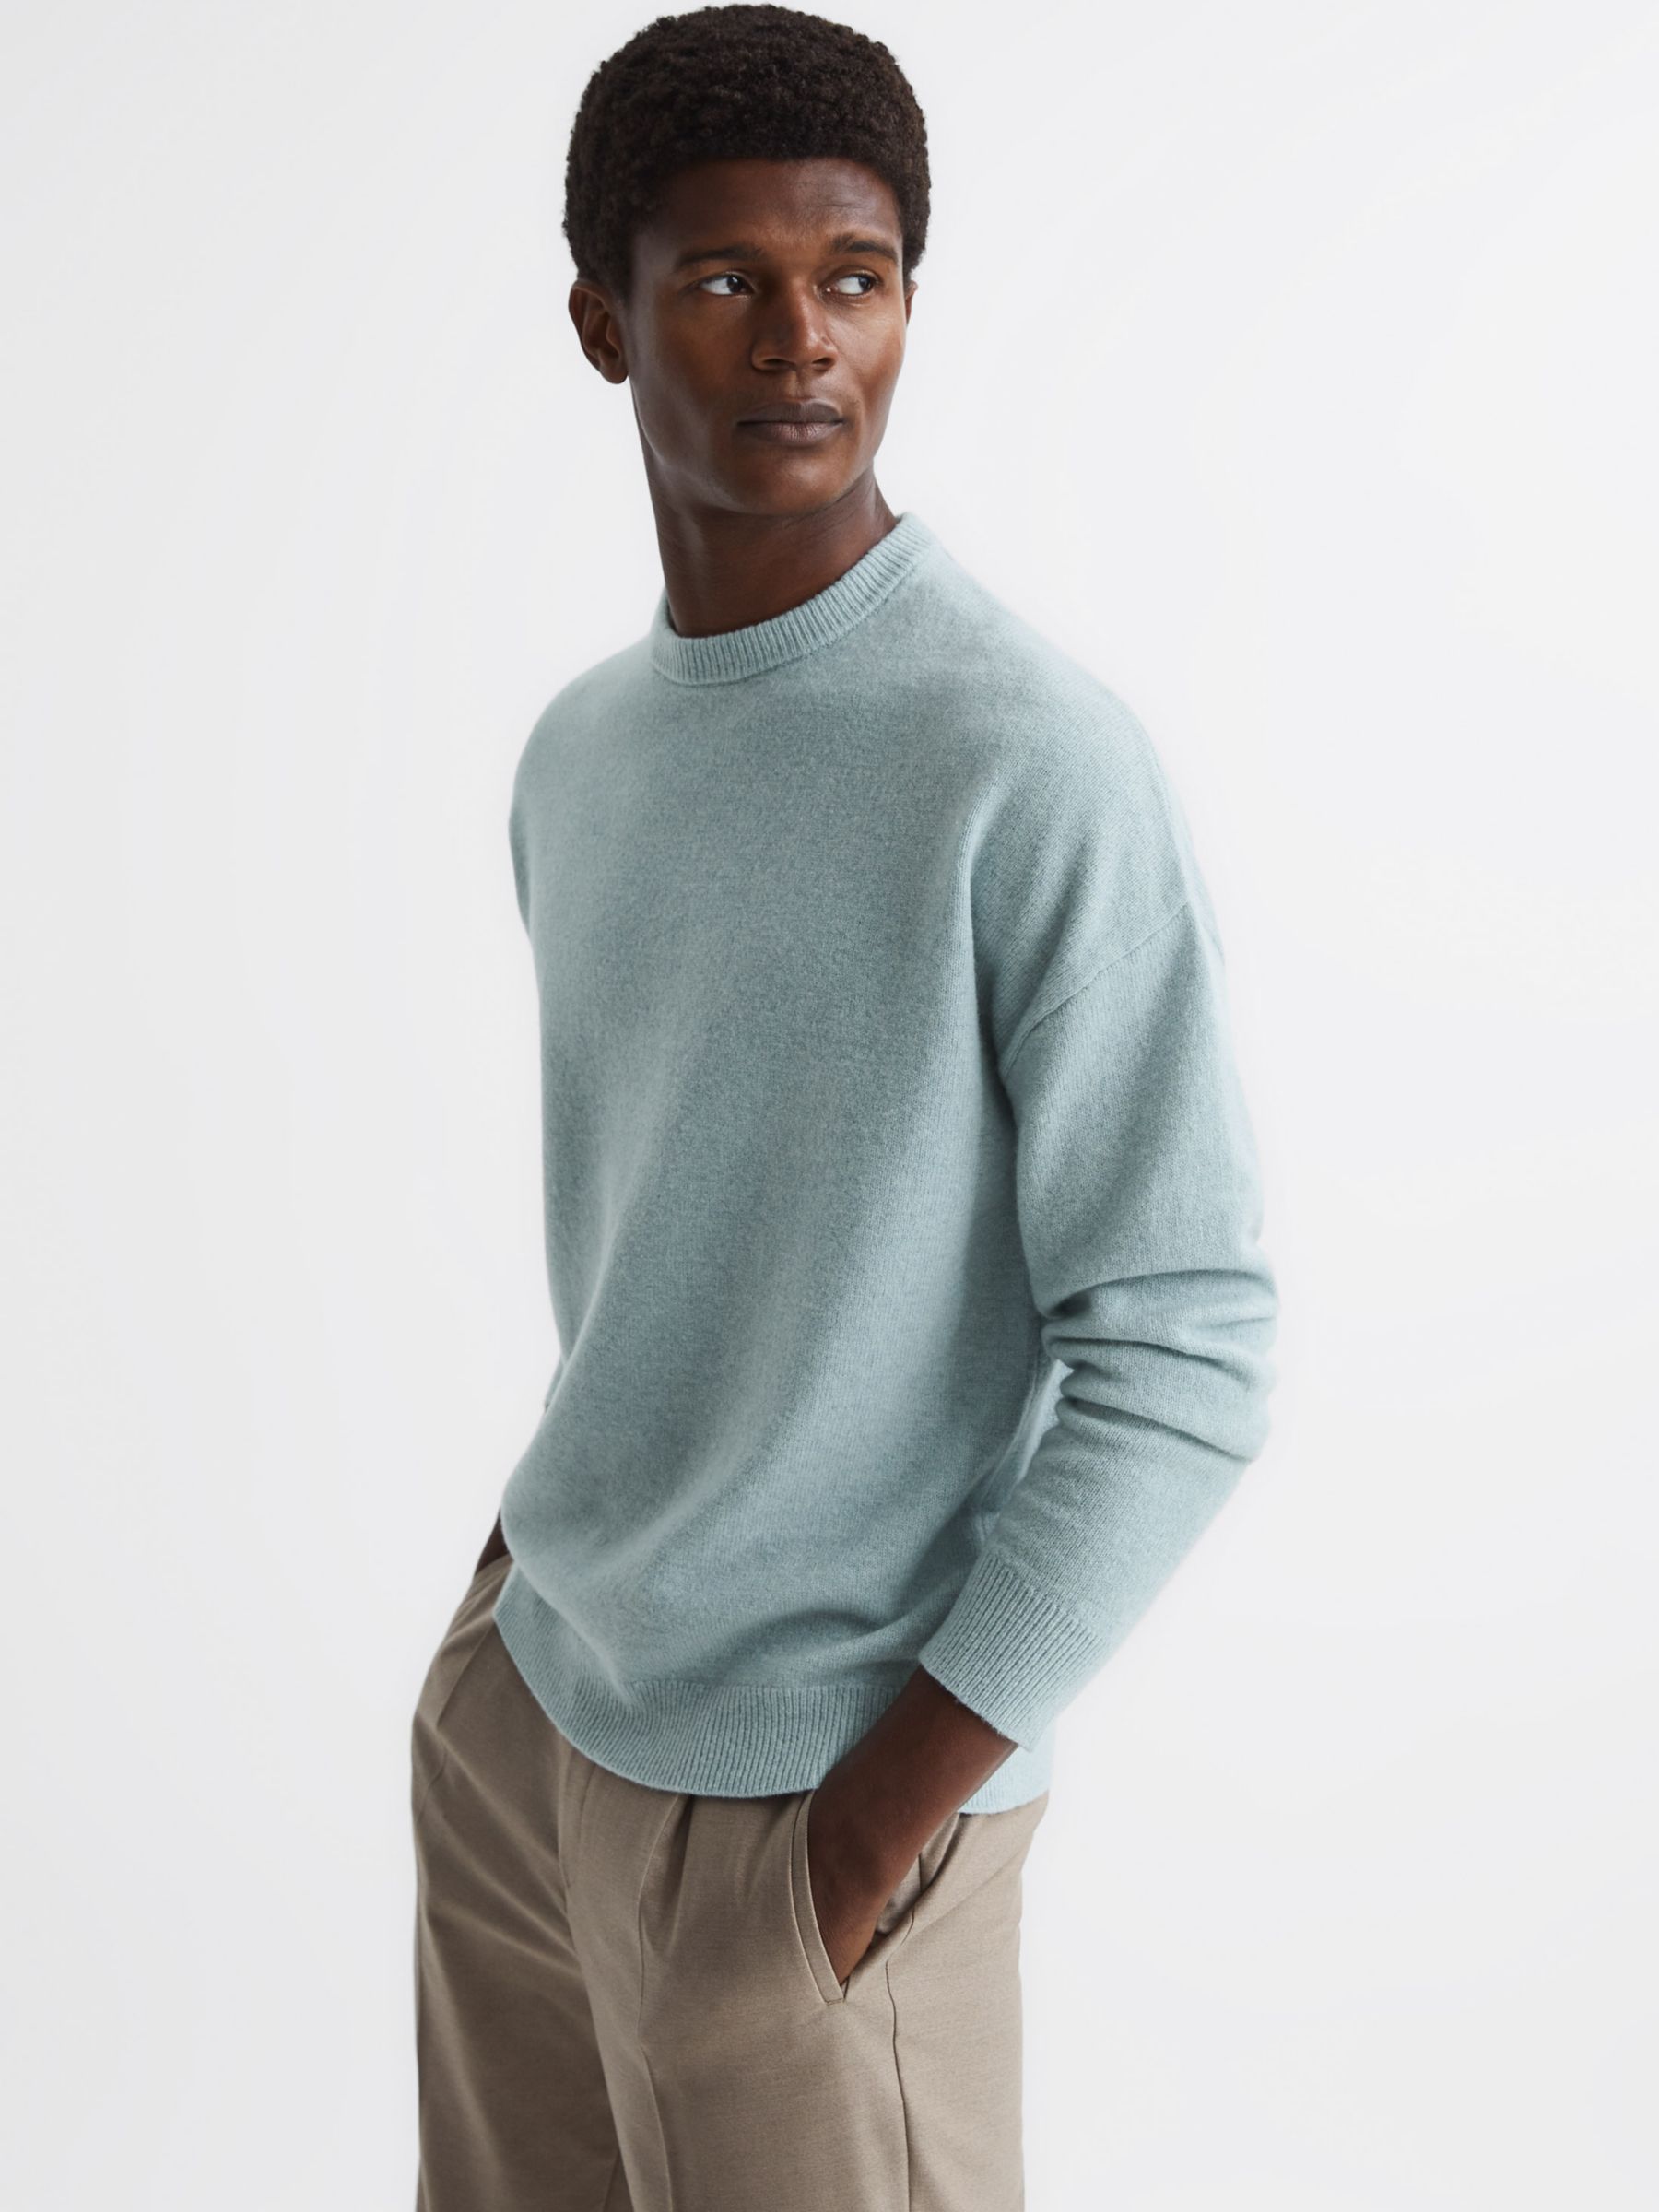 Men's Jumpers and Sweaters, Explore our New Arrivals